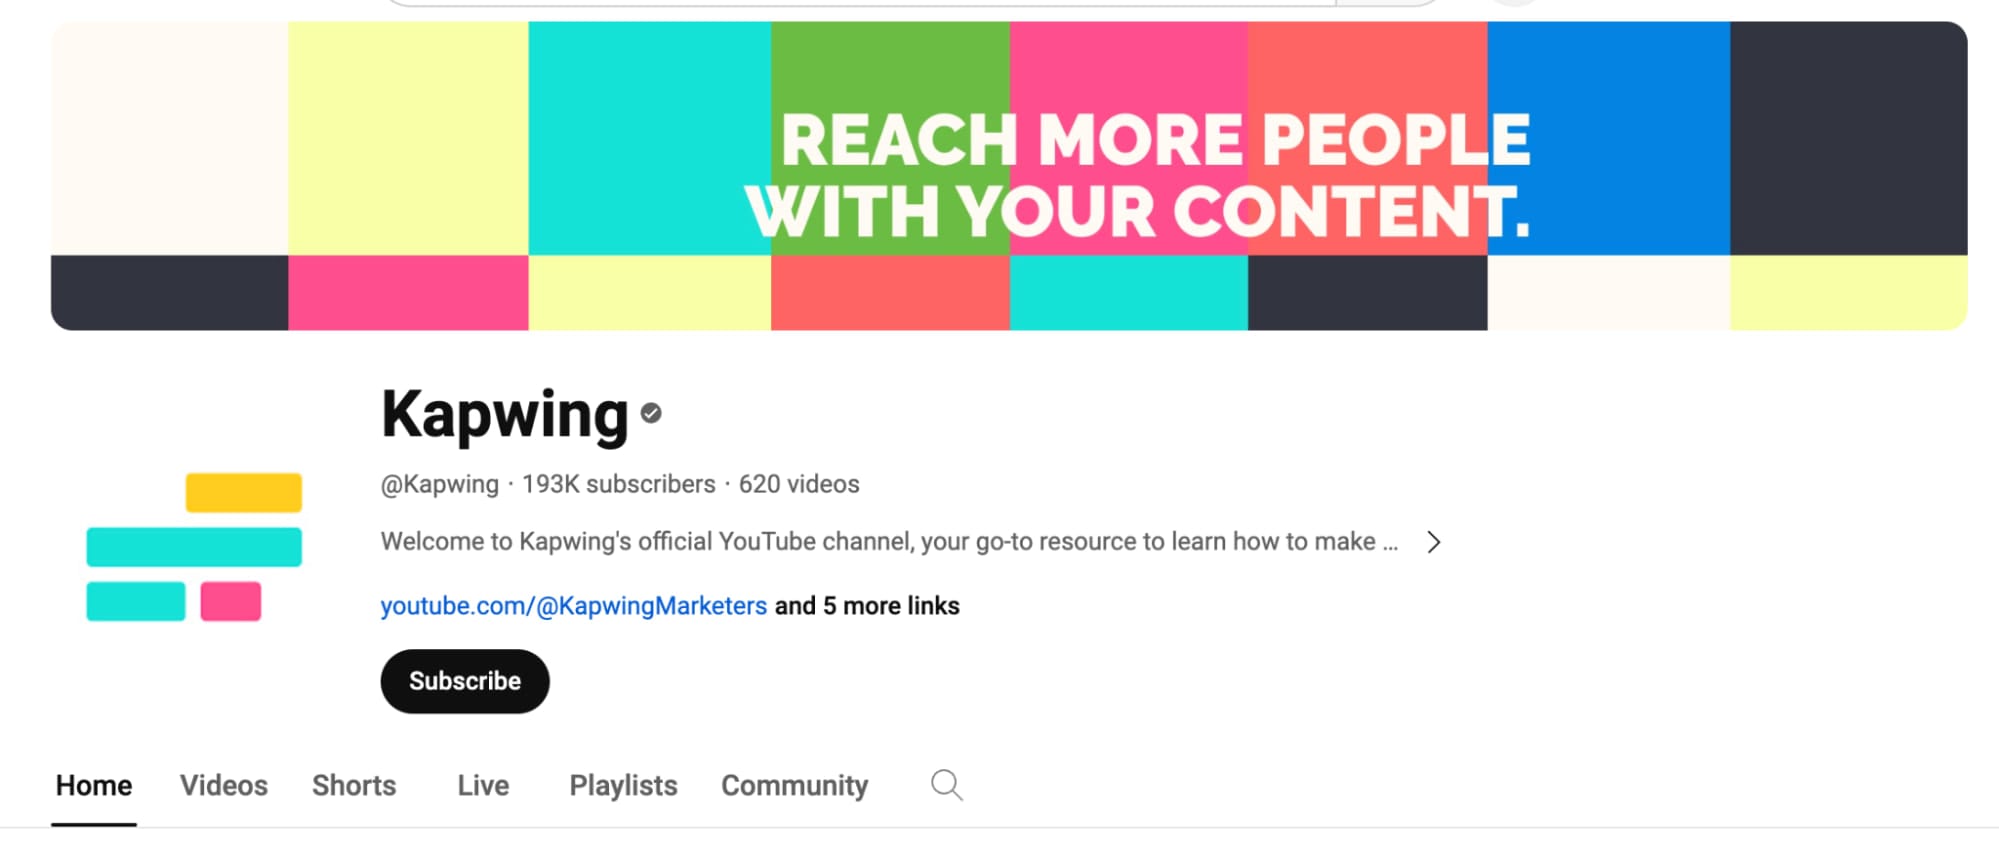 Screenshot of the Kapwing YouTube channel with 193k subscribers.